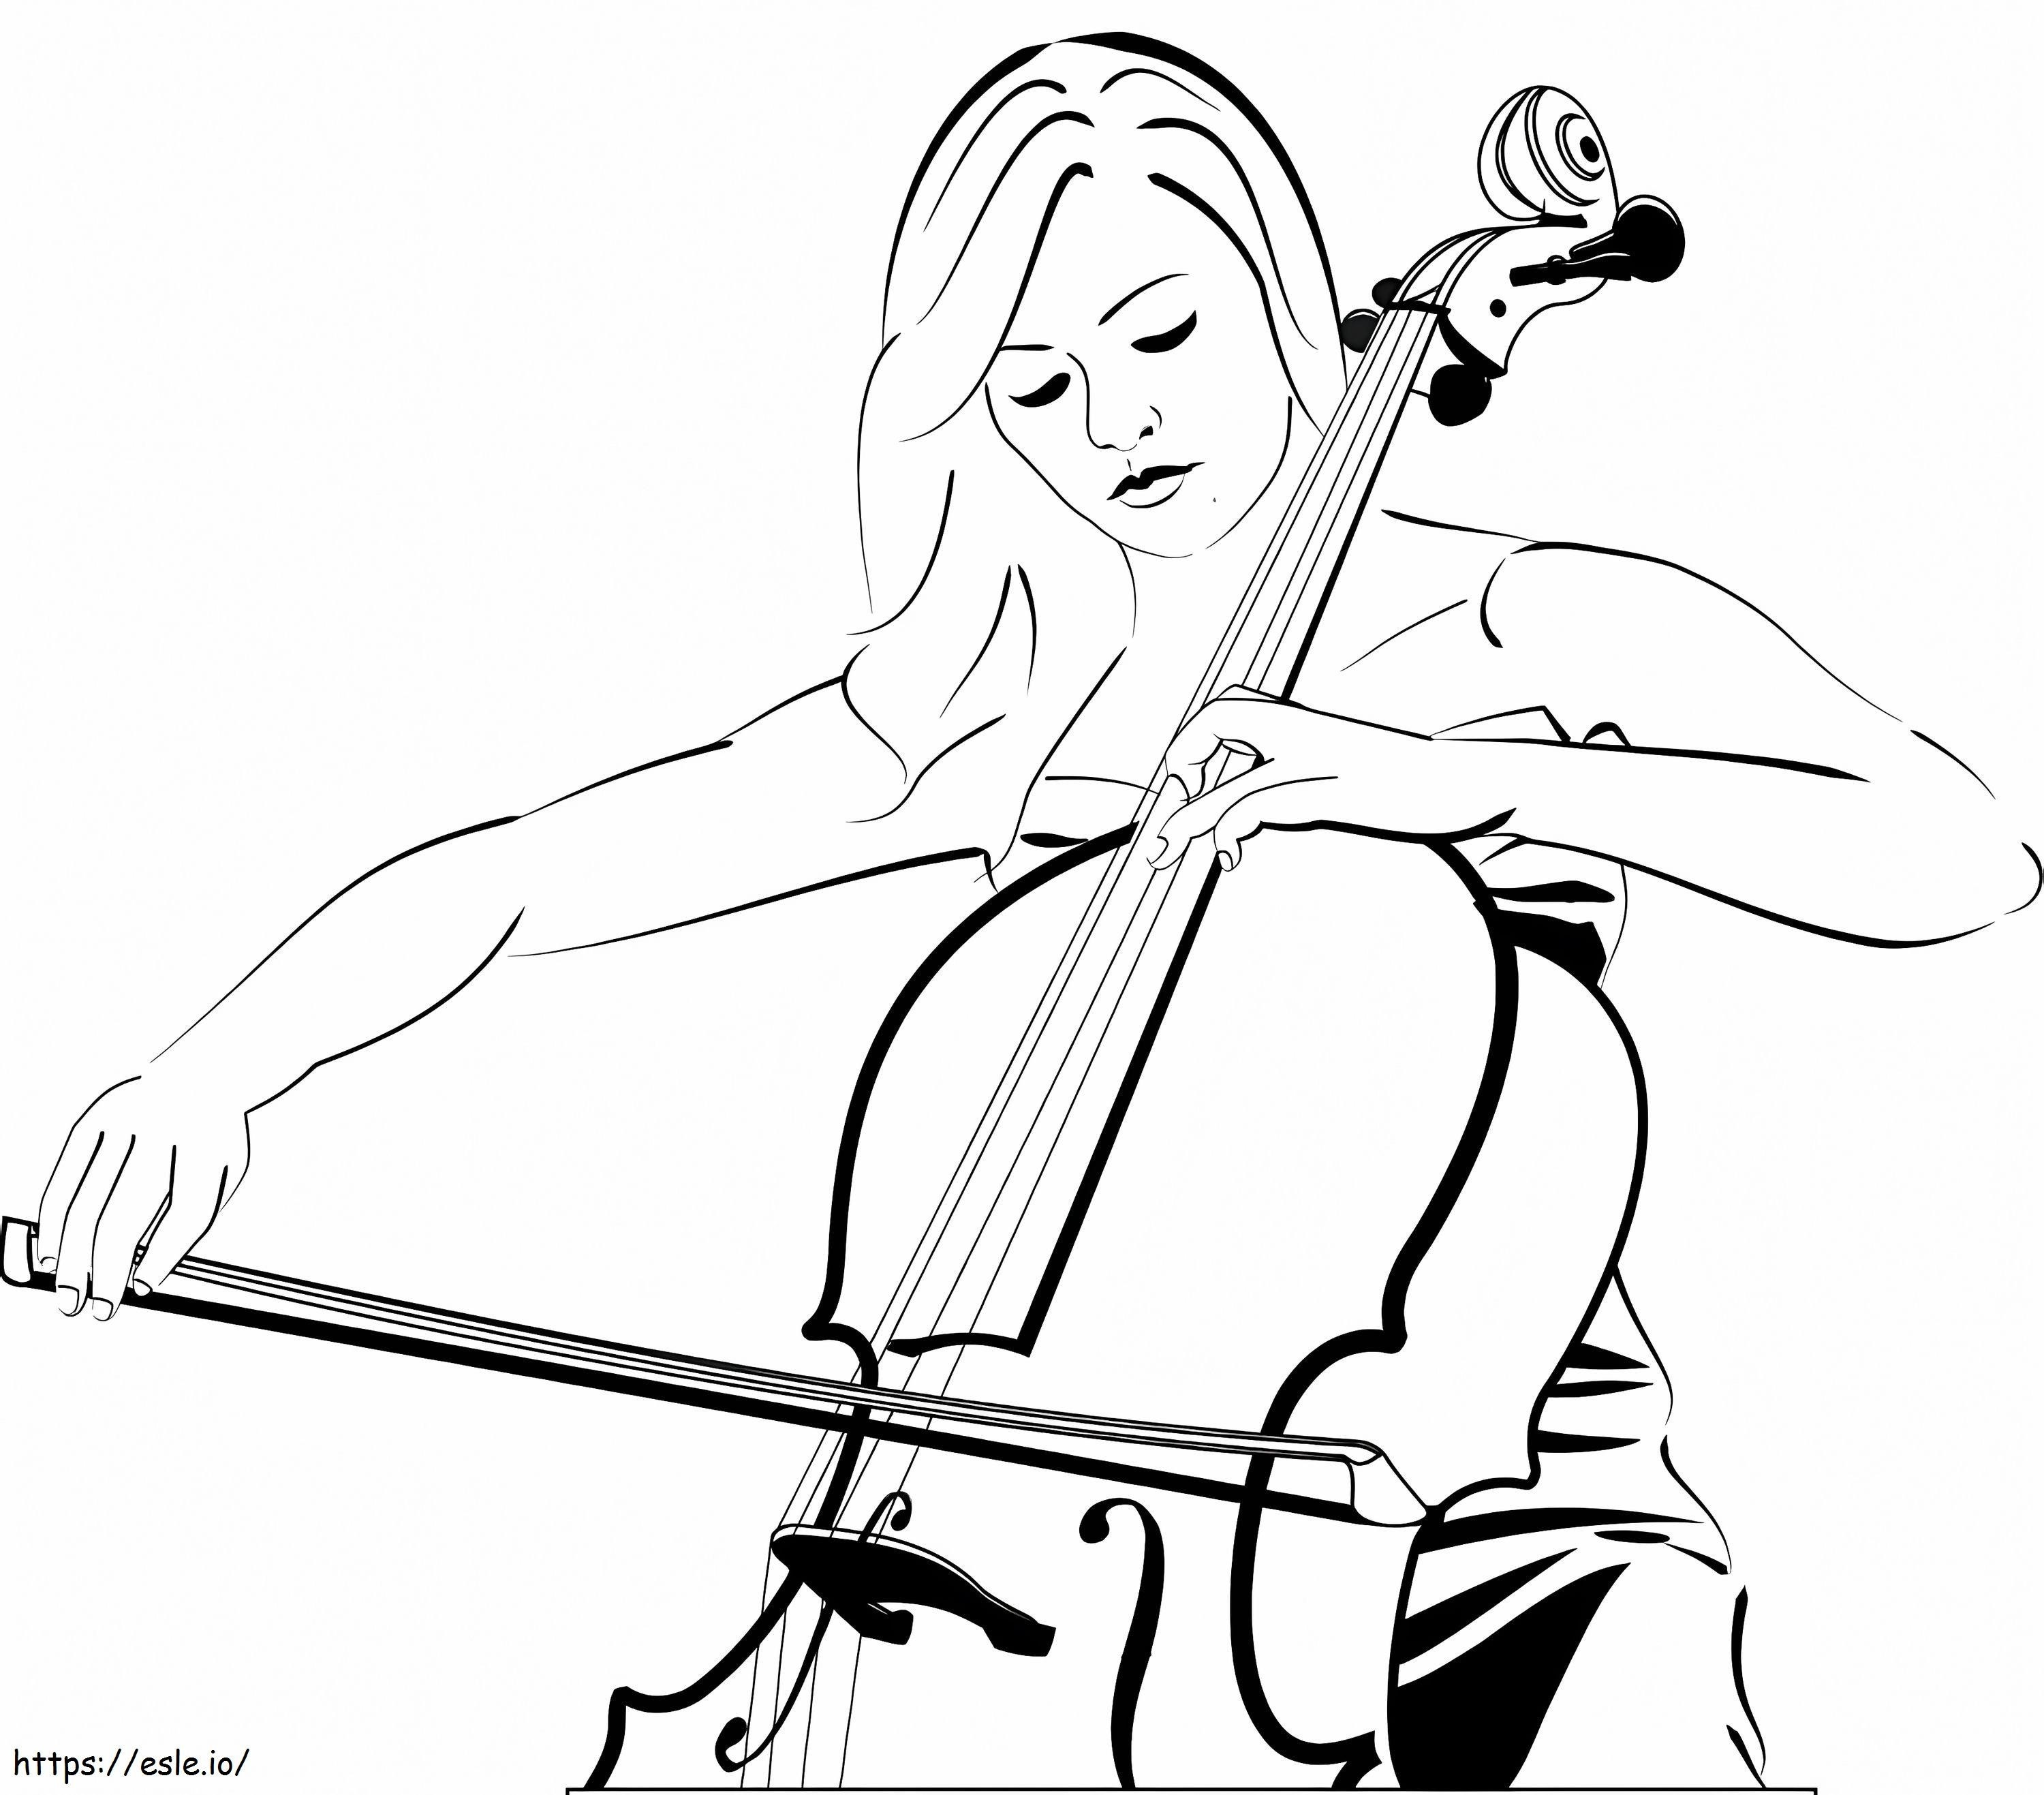 Woman Playing Cello coloring page